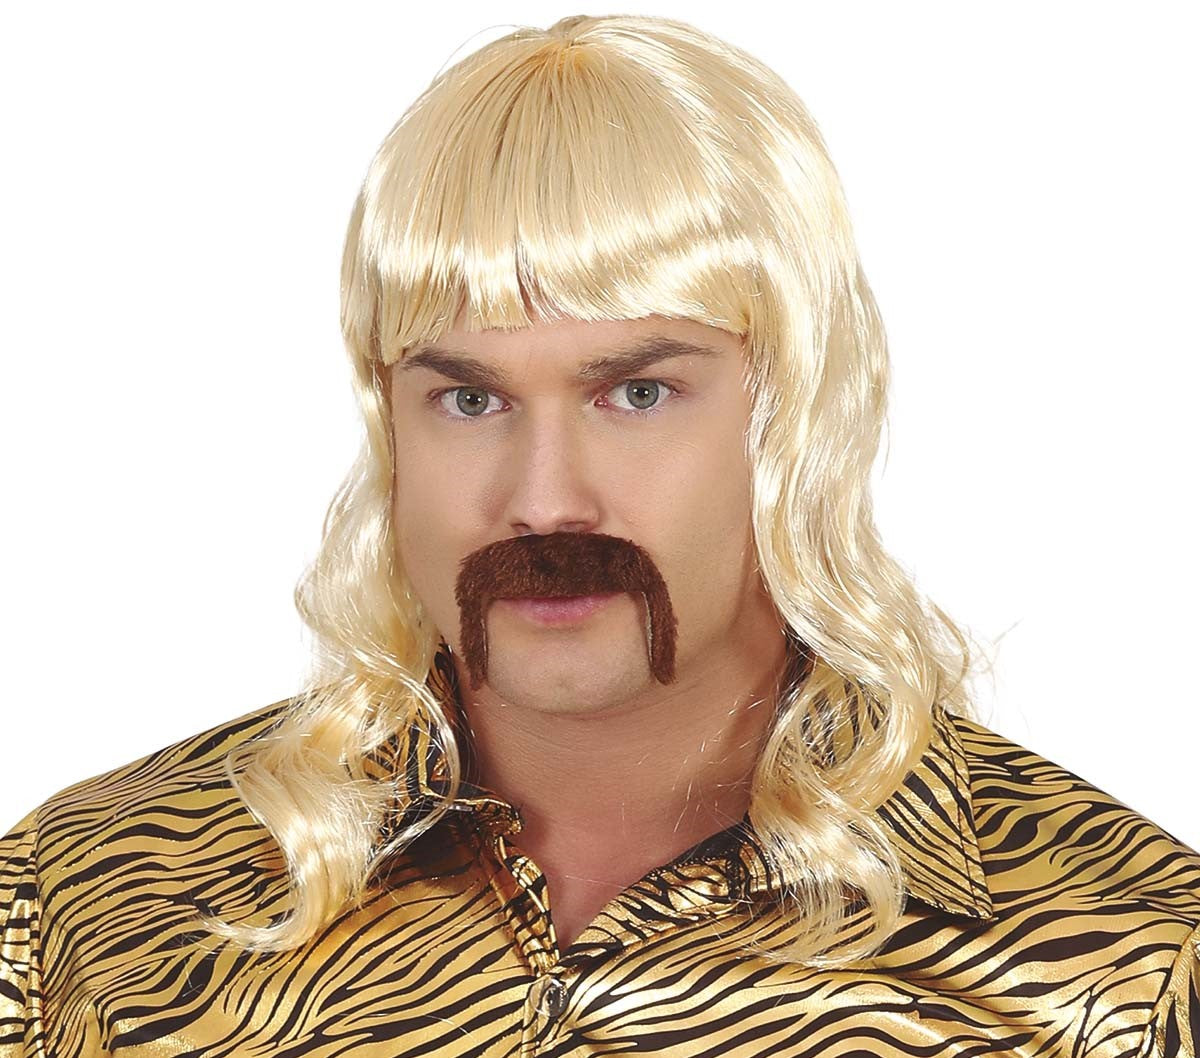 Tiger King Mullet Wig and Moustache